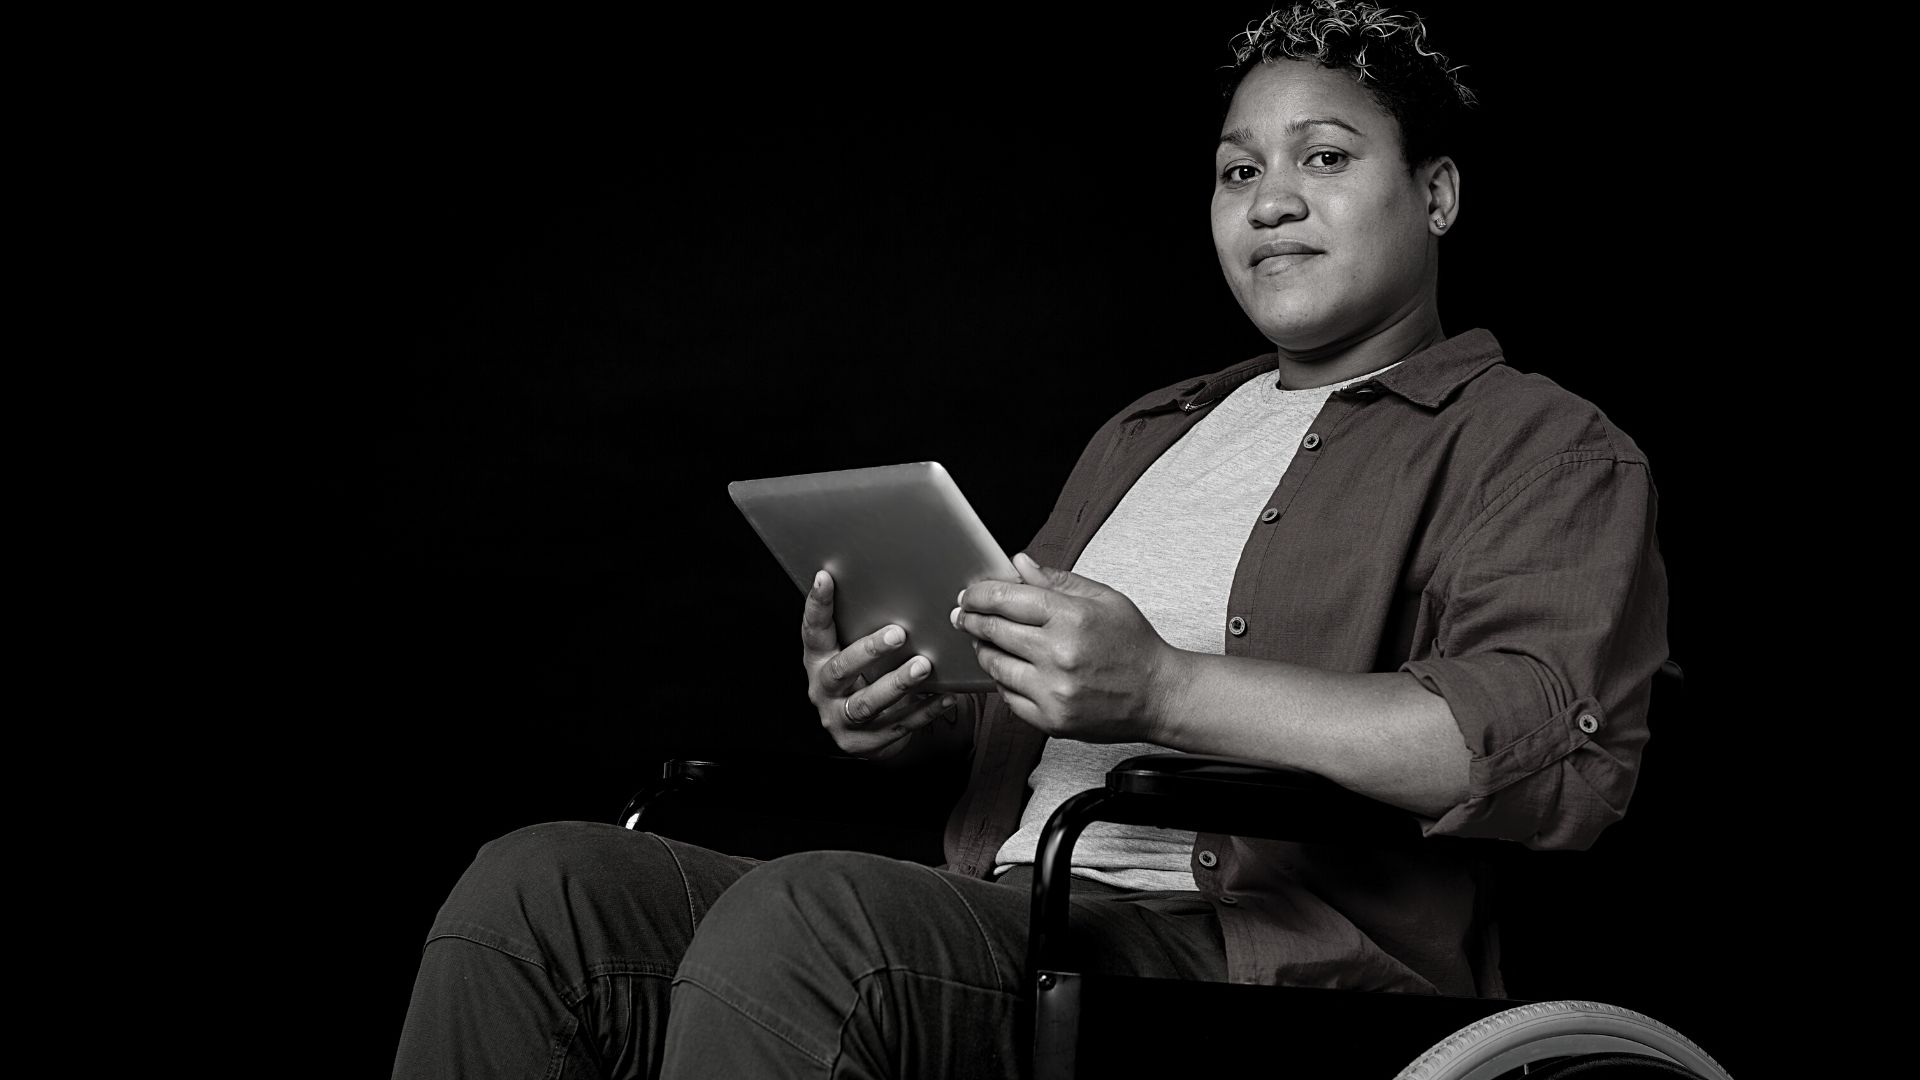 A person holding an iPad while looking directly at the camera with a somewhat serious look on their face, and is in a wheelchair. The background behind is pure black.